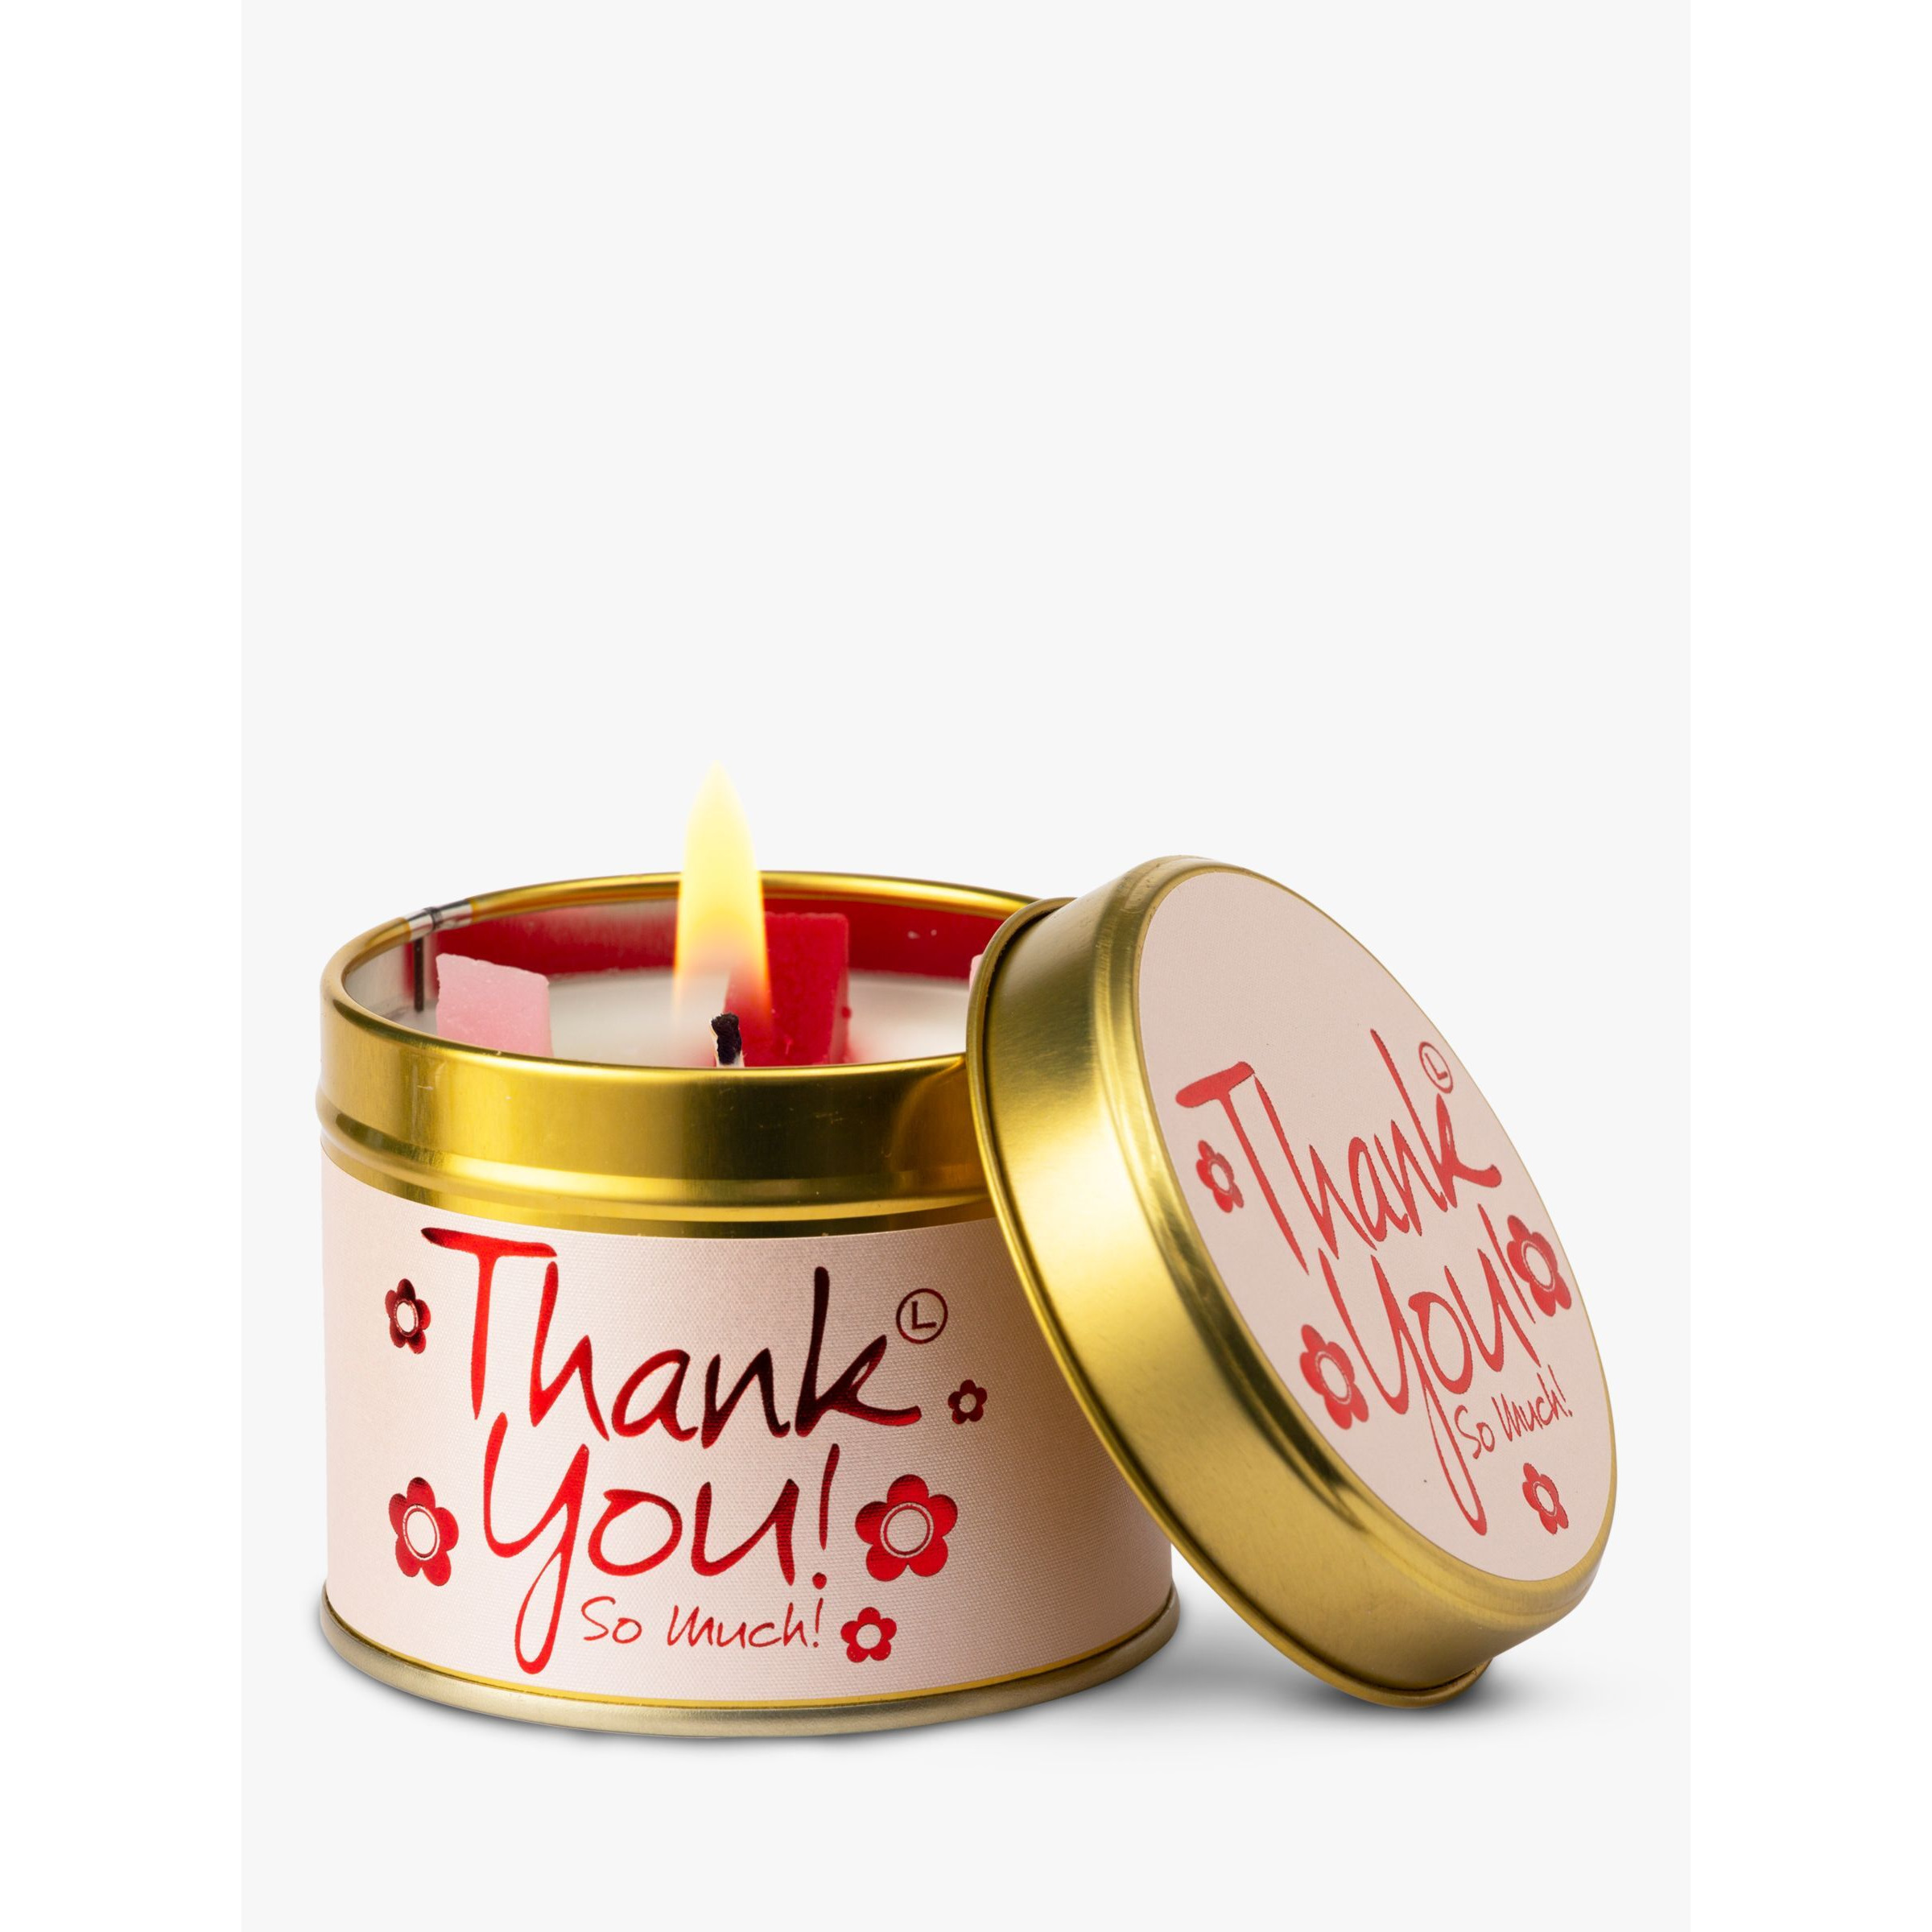 Lily-flame Thank You! Scented Tin Candle, 230g - image 1